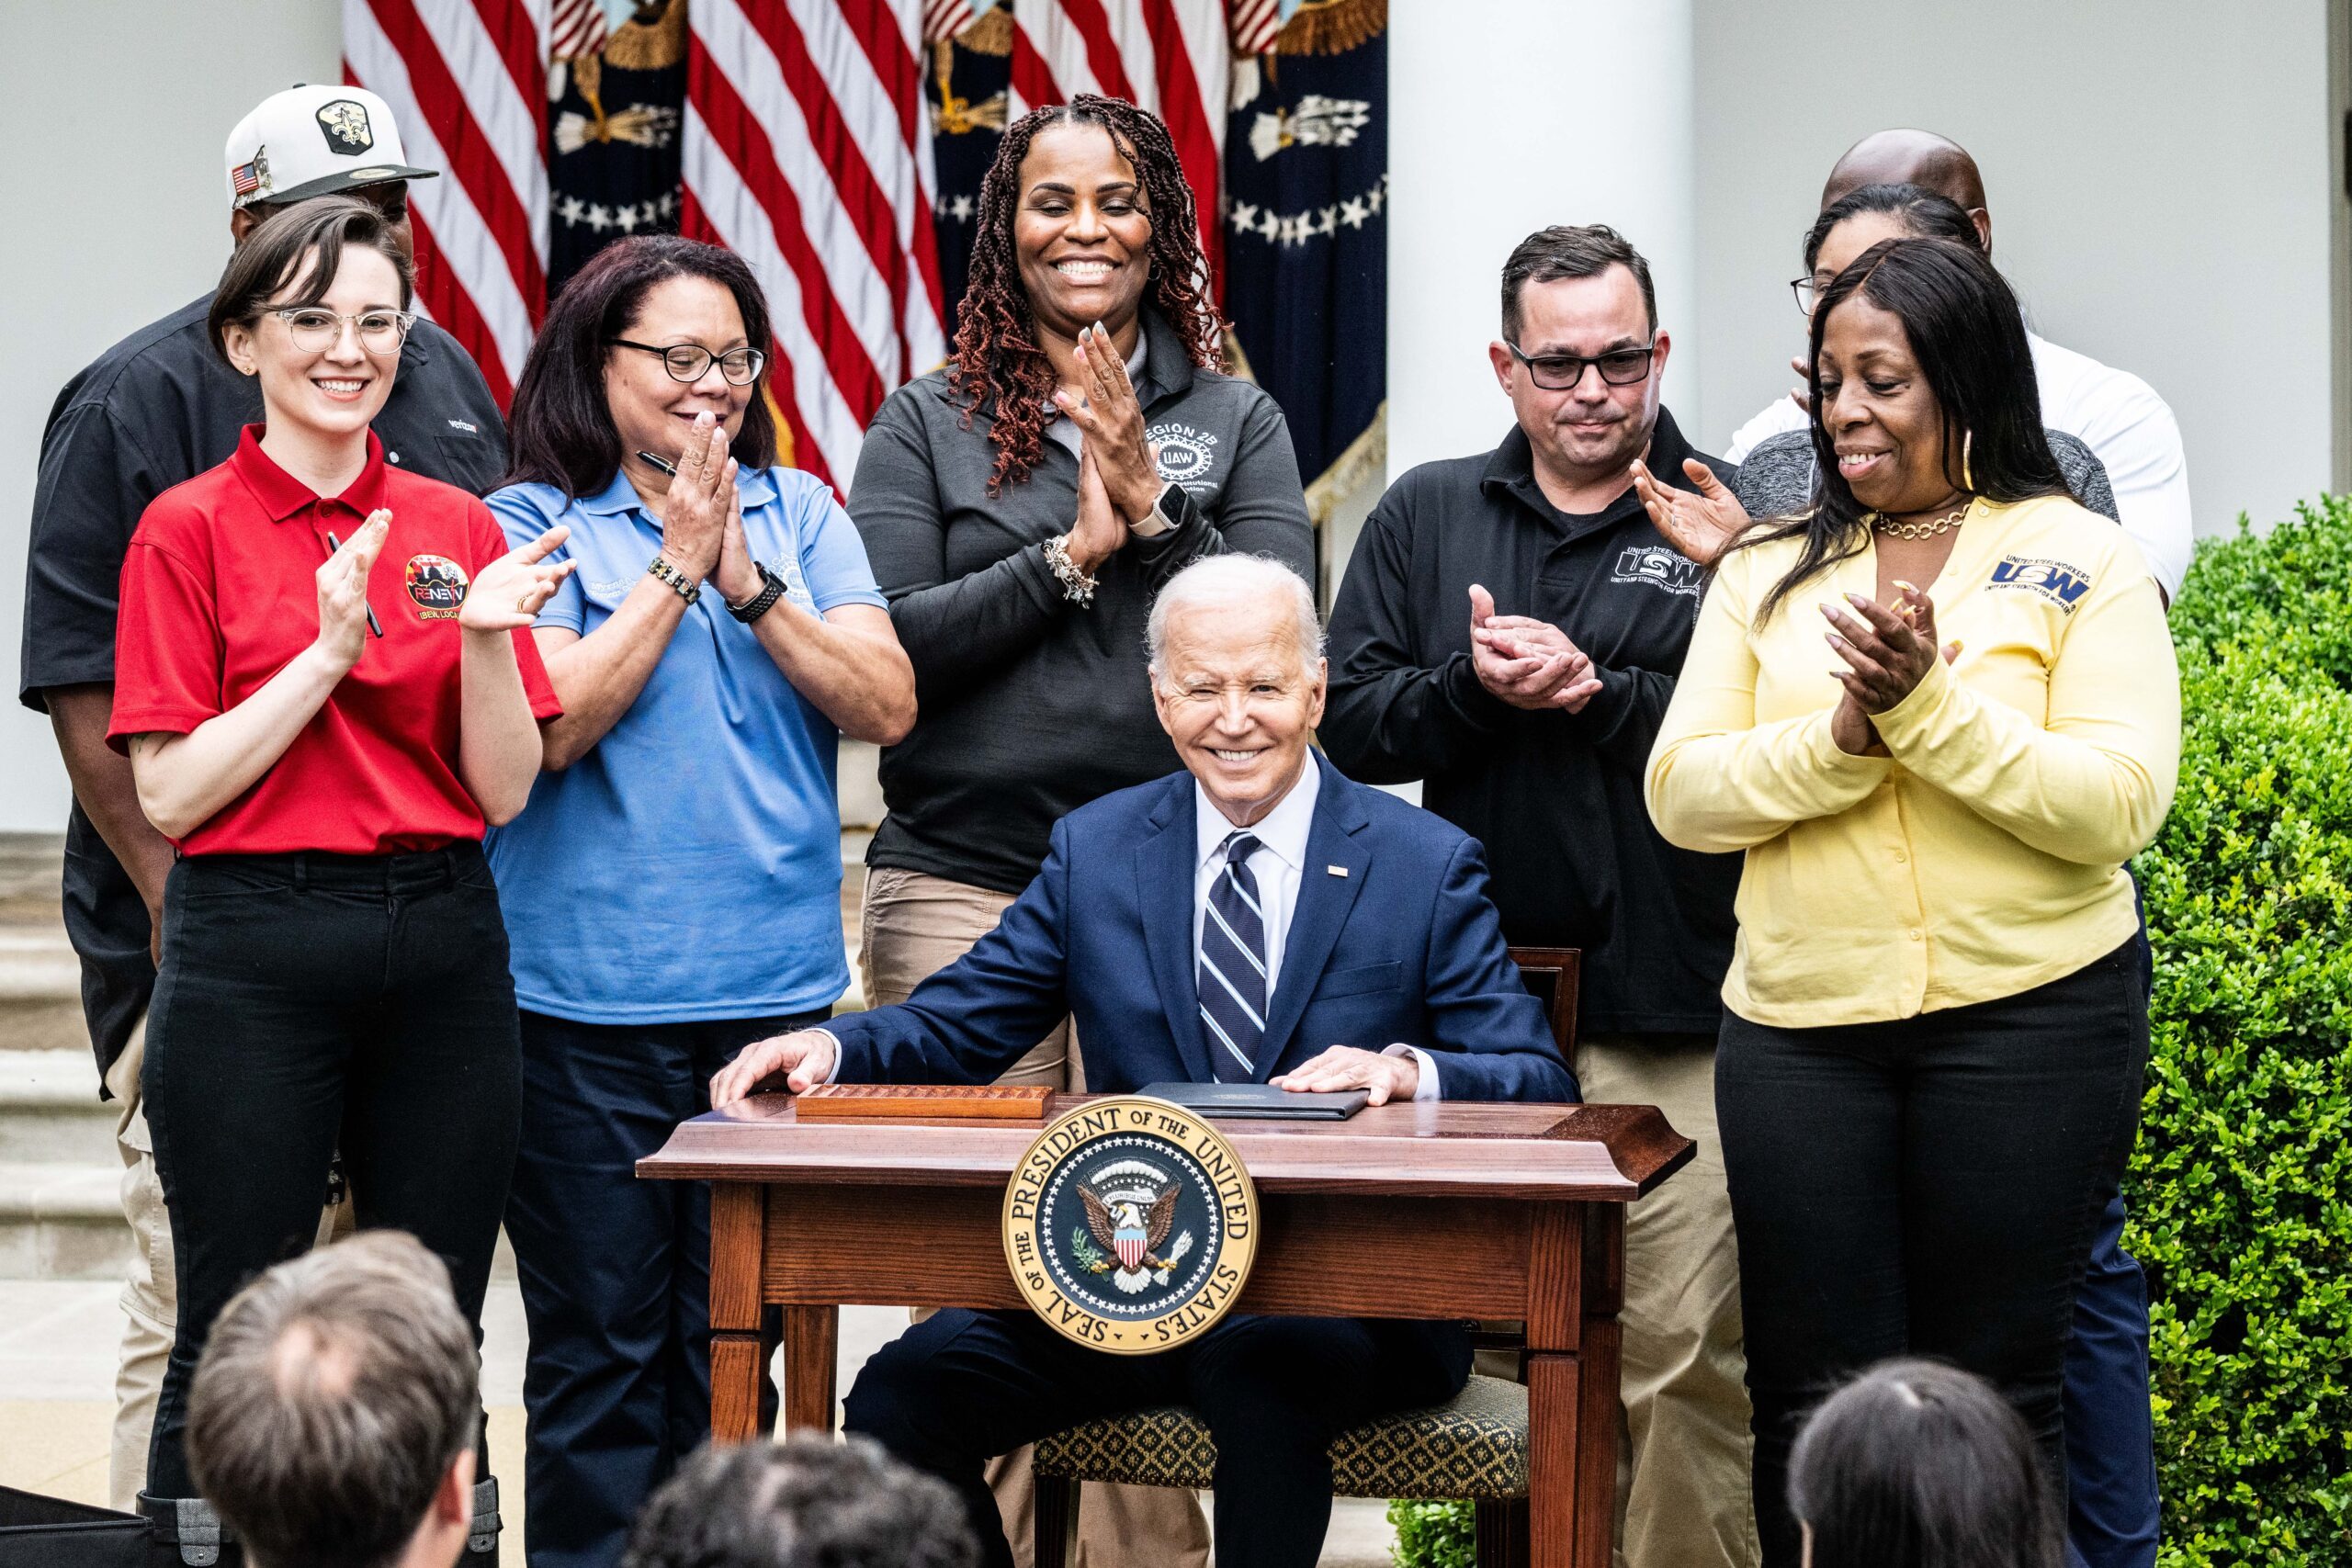 President Joe Biden pictured just after signing documents to bring in tariffs on Chinese goods